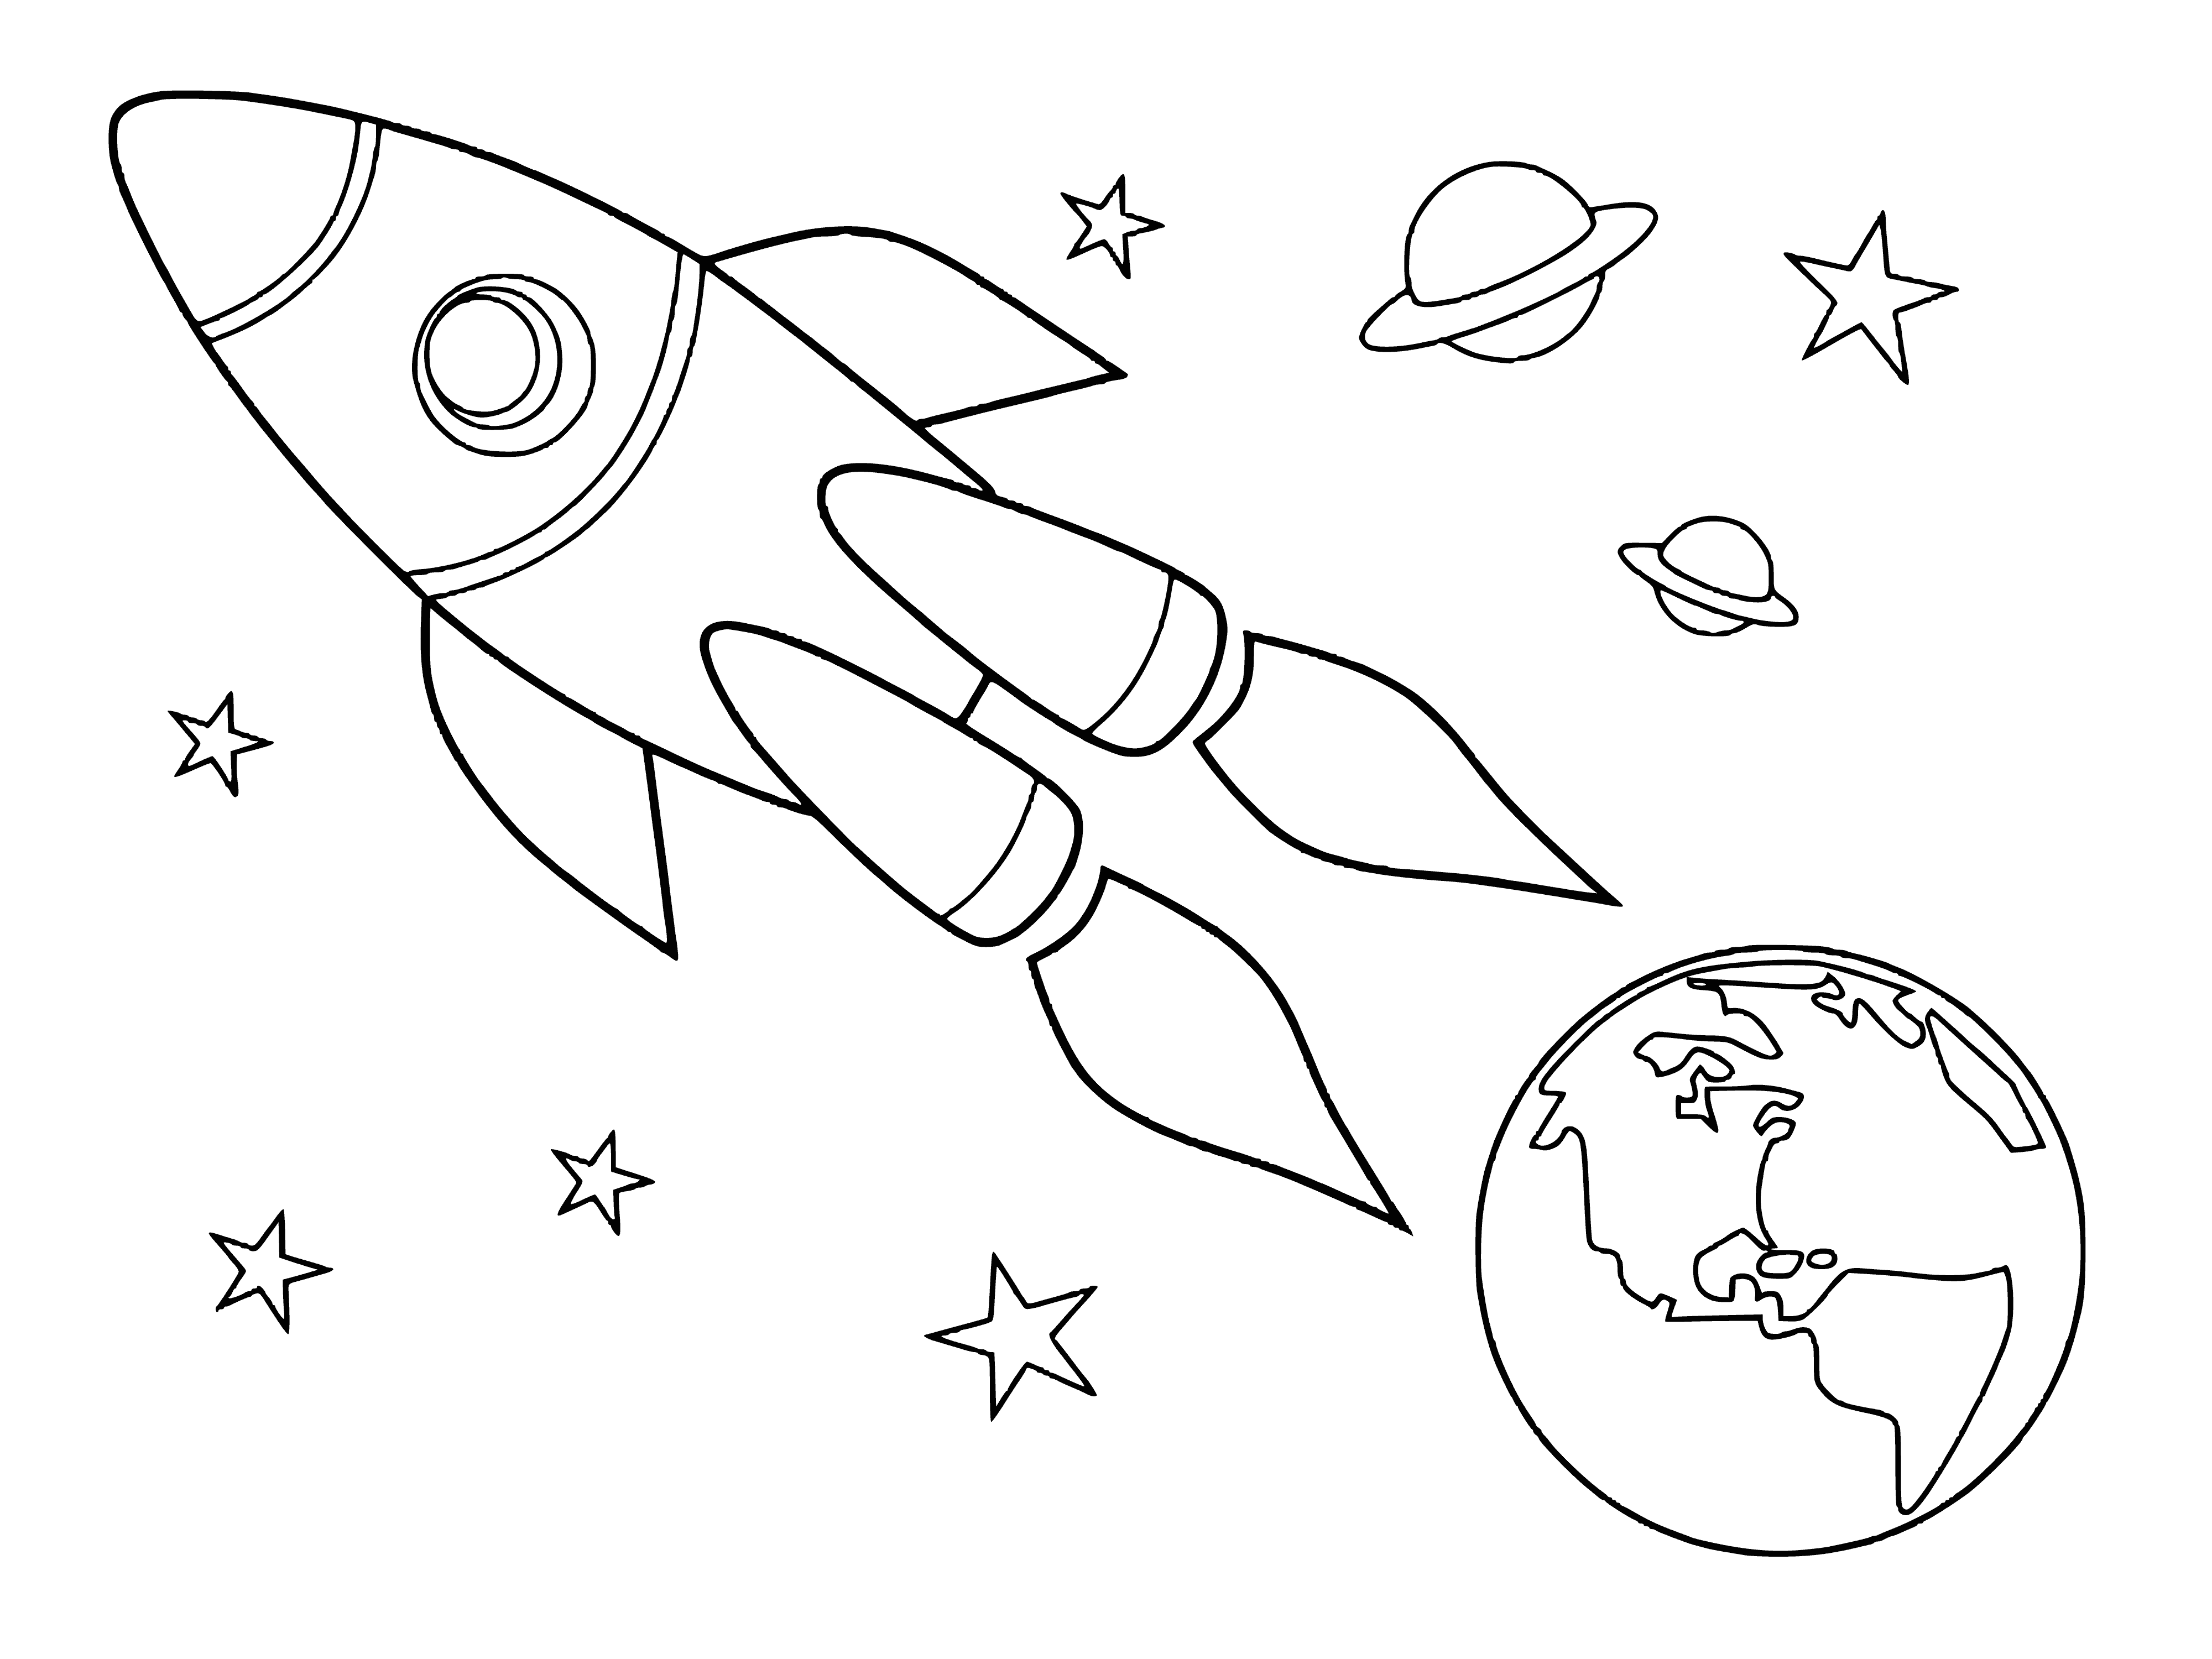 coloring page: Rocket flies away from Earth, leaving trail of smoke behind. Stars twinkle in the dark background.